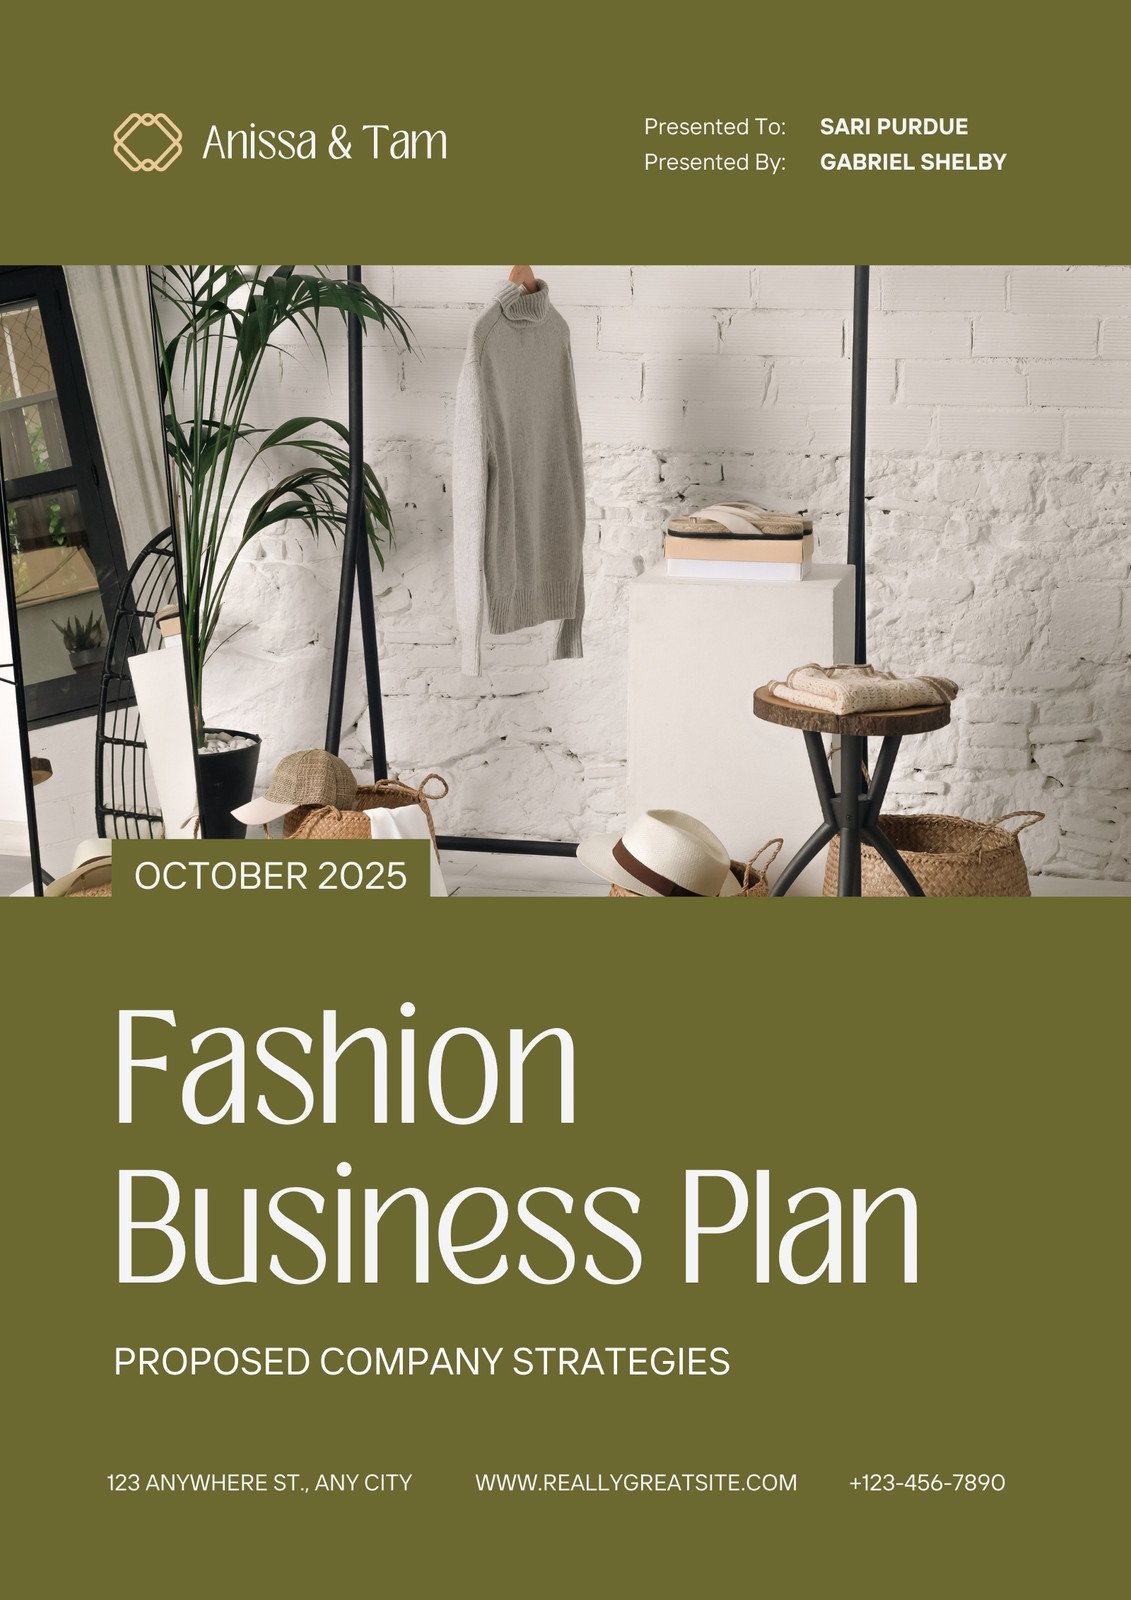 Customize 15+ Clothing Business Plans Templates Online - Canva